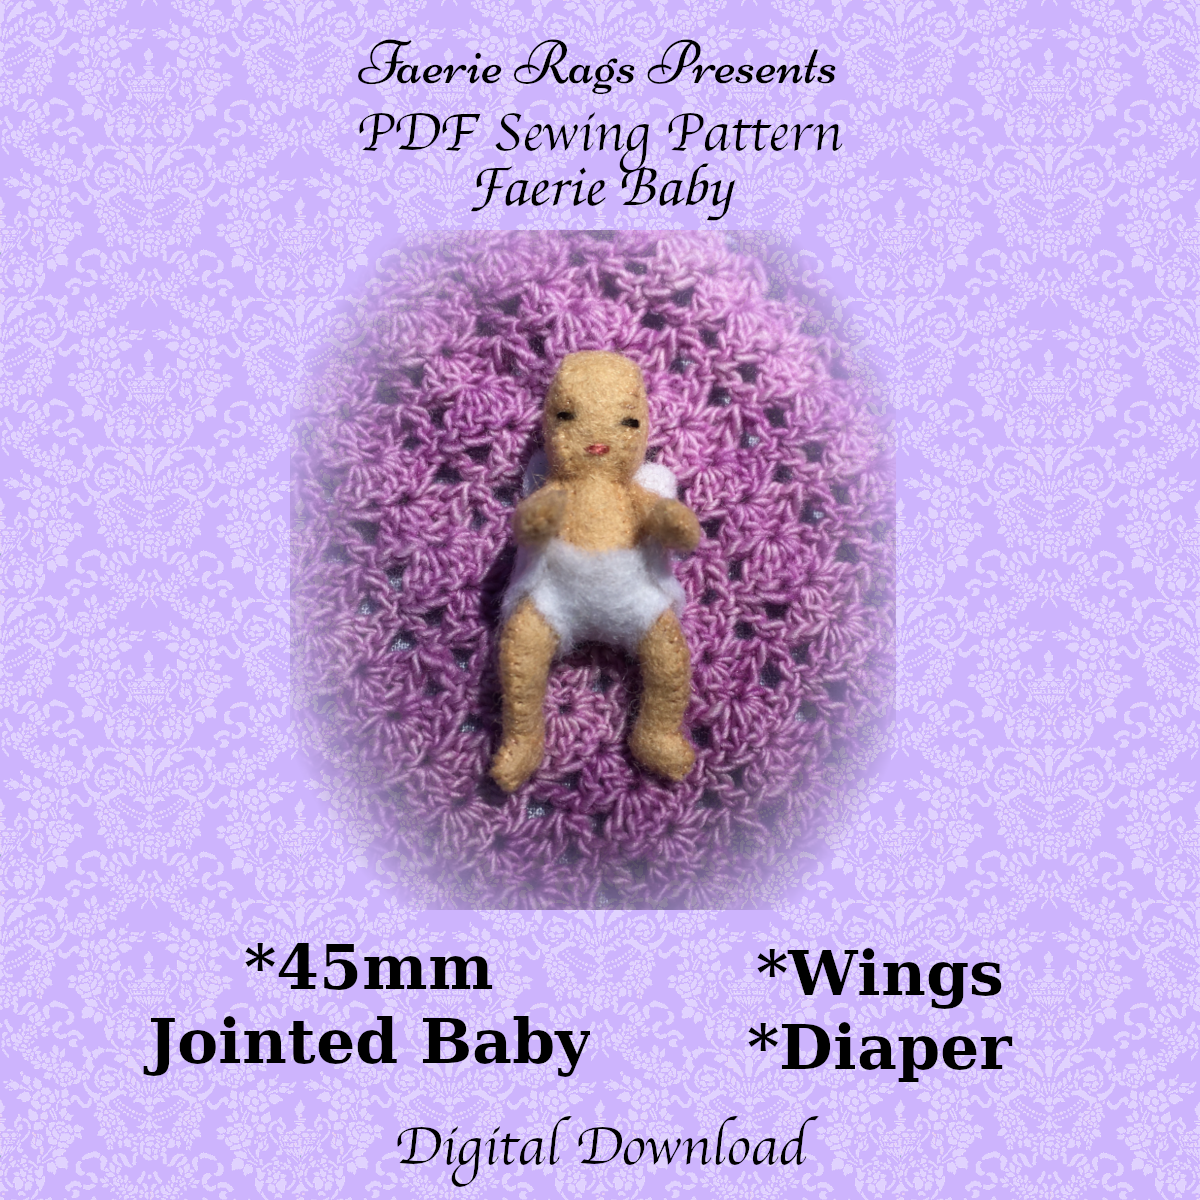 Micro Faerie Baby Doll